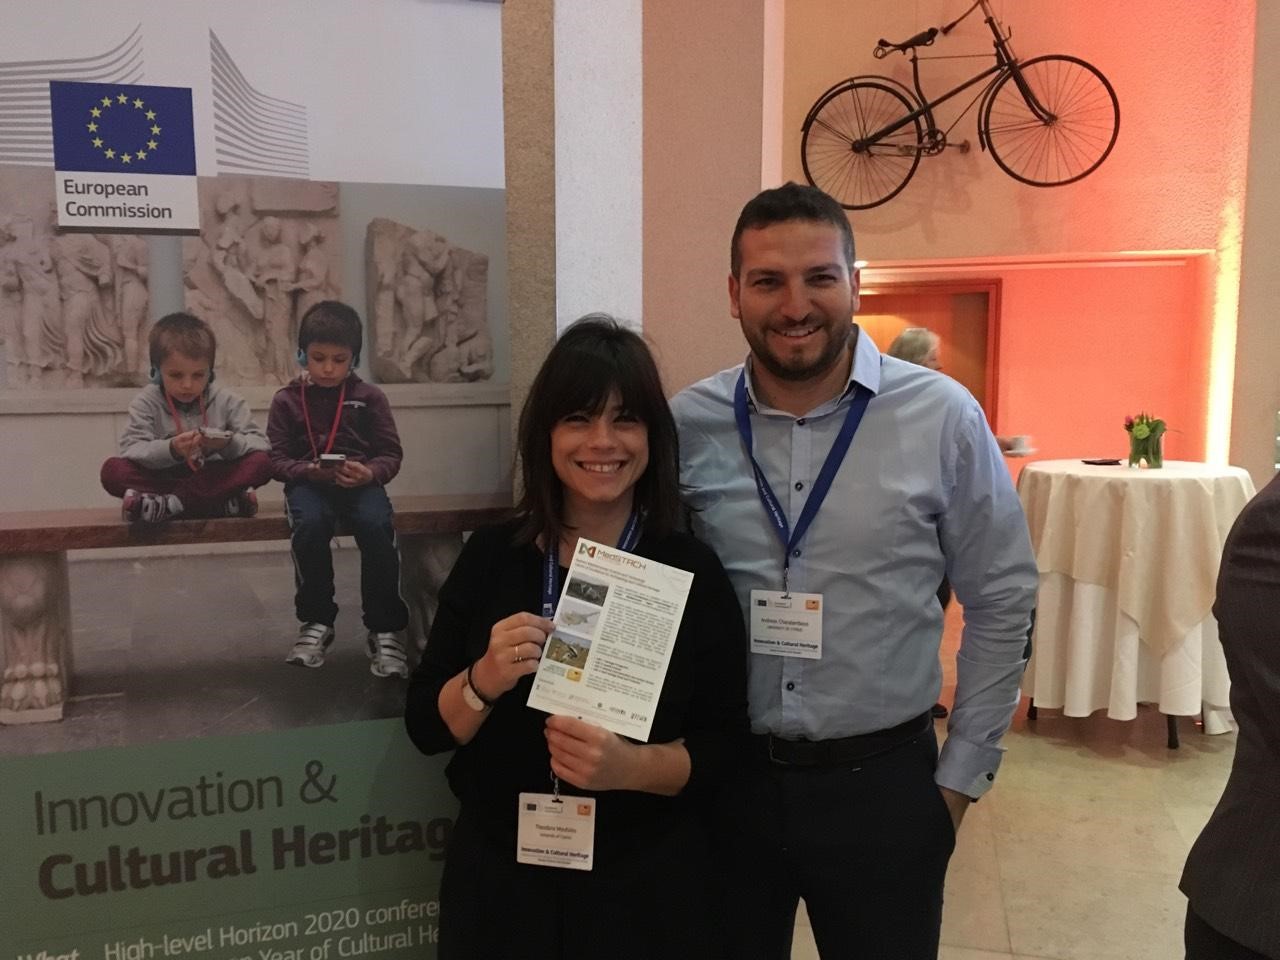 Drs. Theodora Moutsiou and Andreas Charalambous delegates of MedSTACH at the Innovation & Cultural Heritage High-level Conference in Brussels, 20 March 2018.